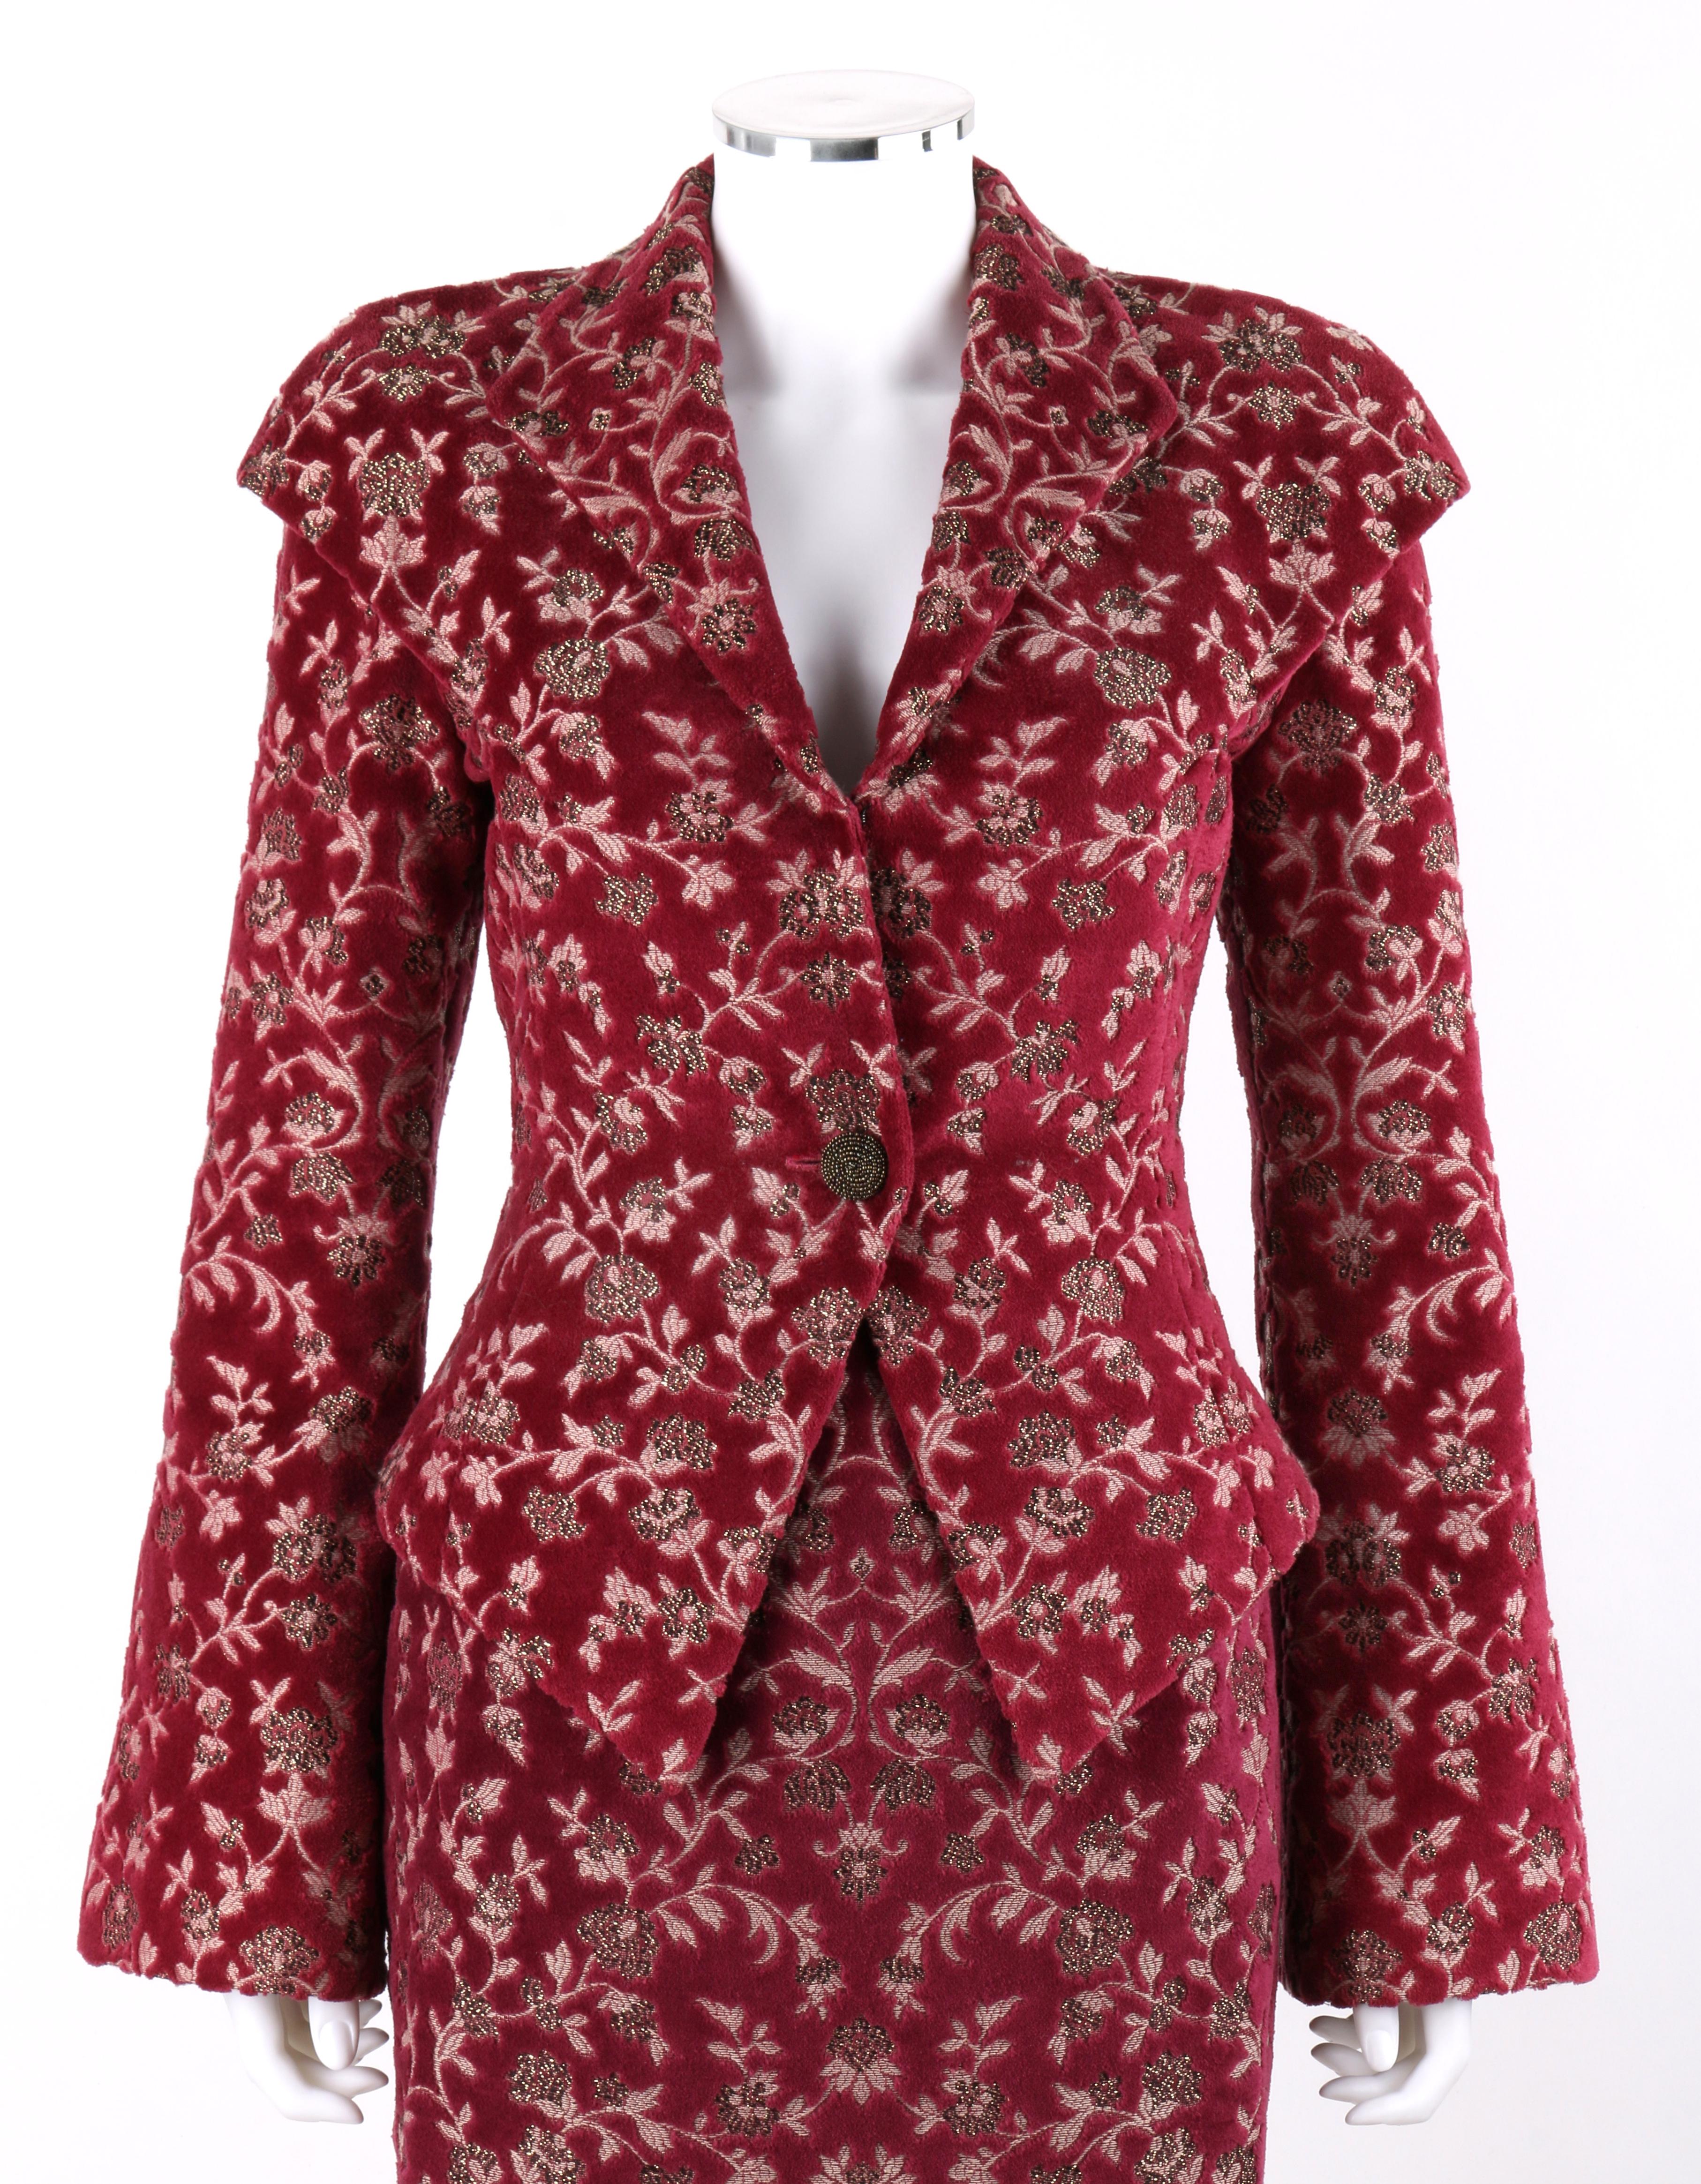 DESCRIPTION: GIVENCHY Couture S/S 1998 ALEXANDER McQUEEN 2 Pc Floral Jacquard Skirt Suit Set
 
Brand / Manufacturer: Givenchy 
Collection: Couture; Spring / Summer 1998
Designer: Alexander McQueen
Style: Skirt suit
Color(s): Shades of burgundy,